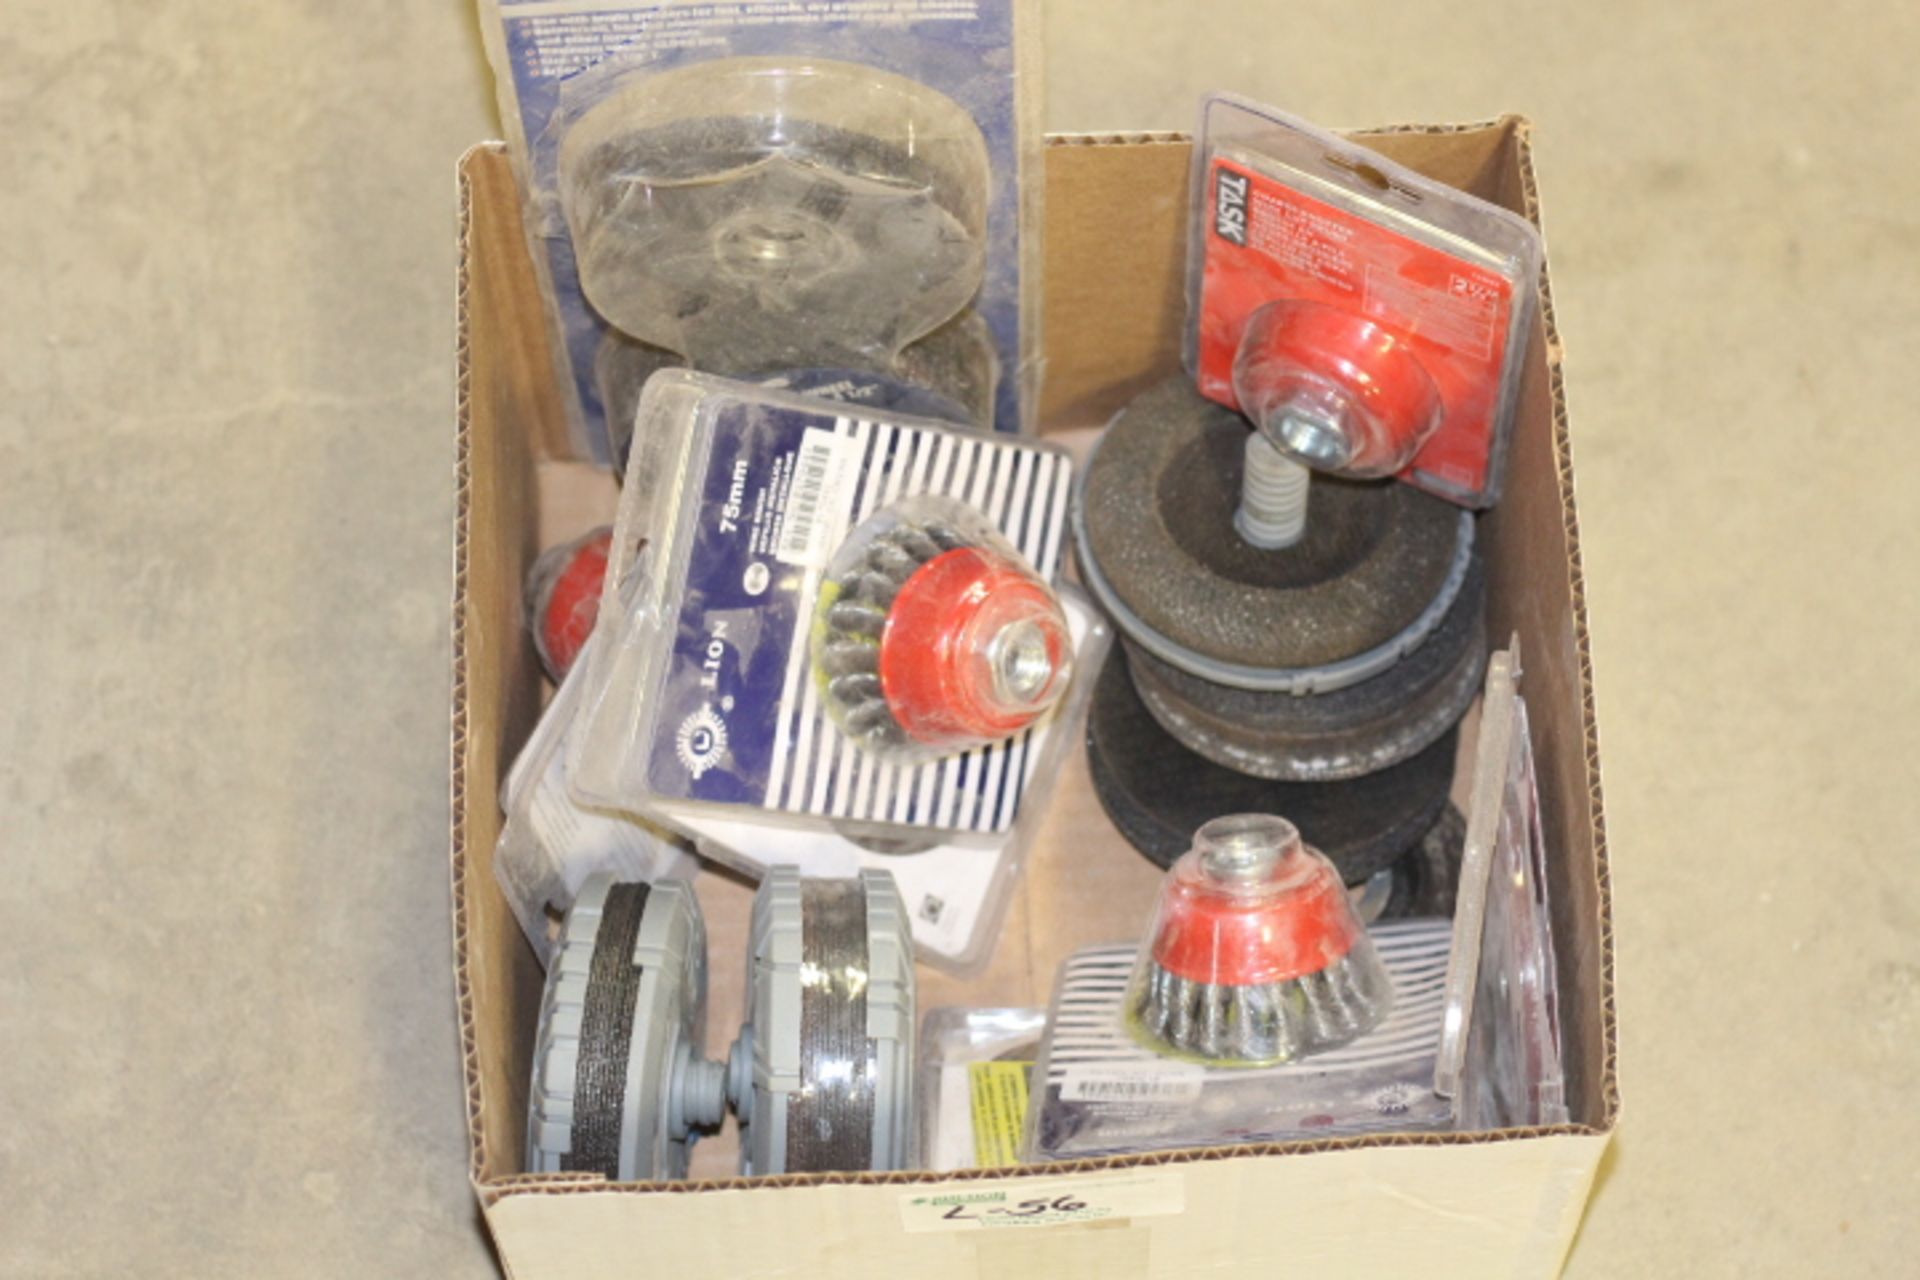 Lot of New and Used Cutting and Grinding Wheels and Cups - Image 2 of 3